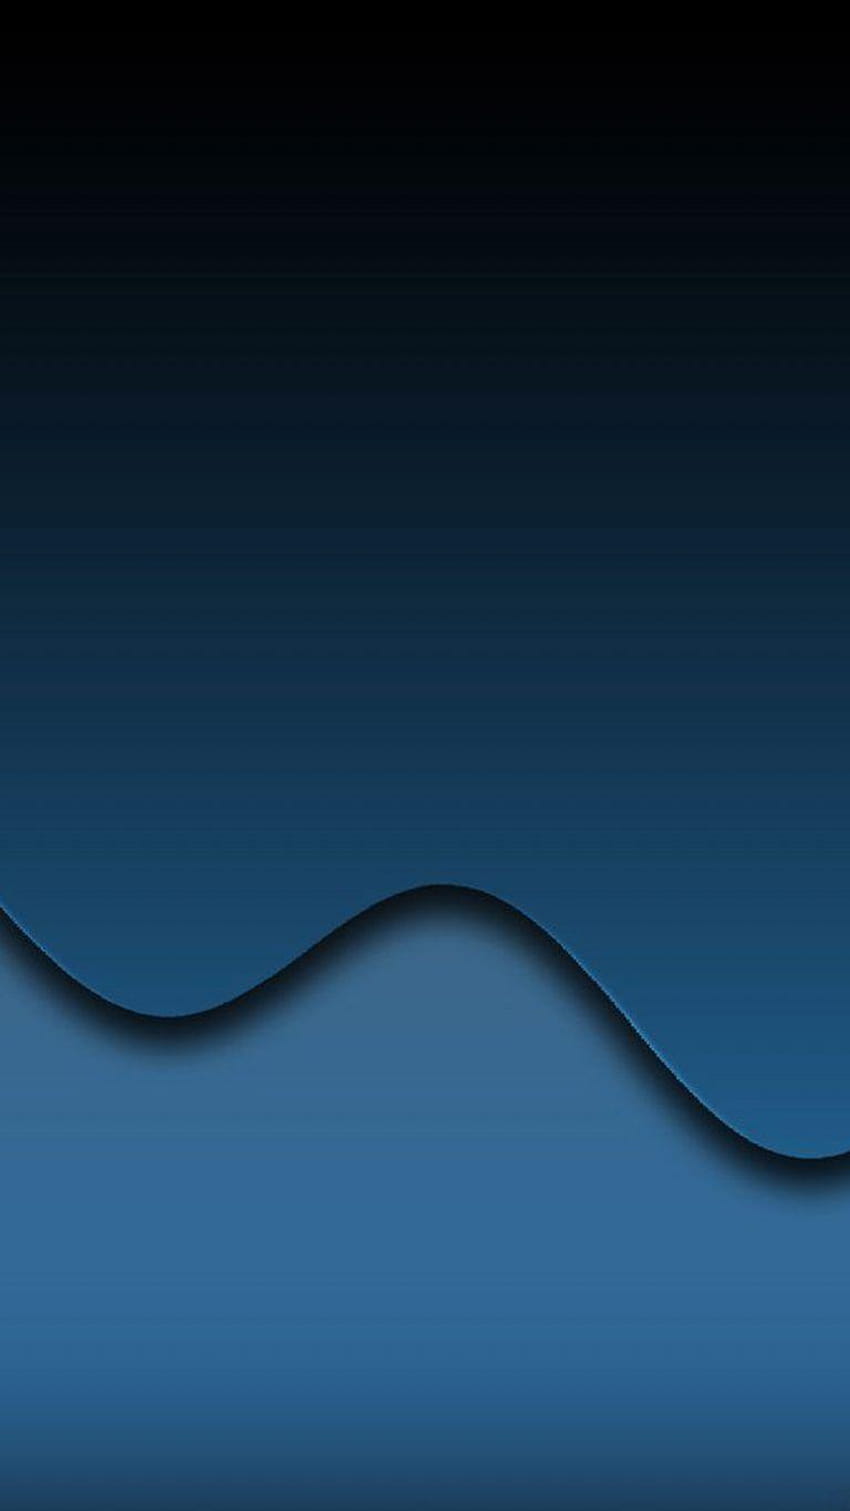 Cool Phone 03 of 10 with Black Wave for Samsung Galaxy, mobile j7 HD phone wallpaper